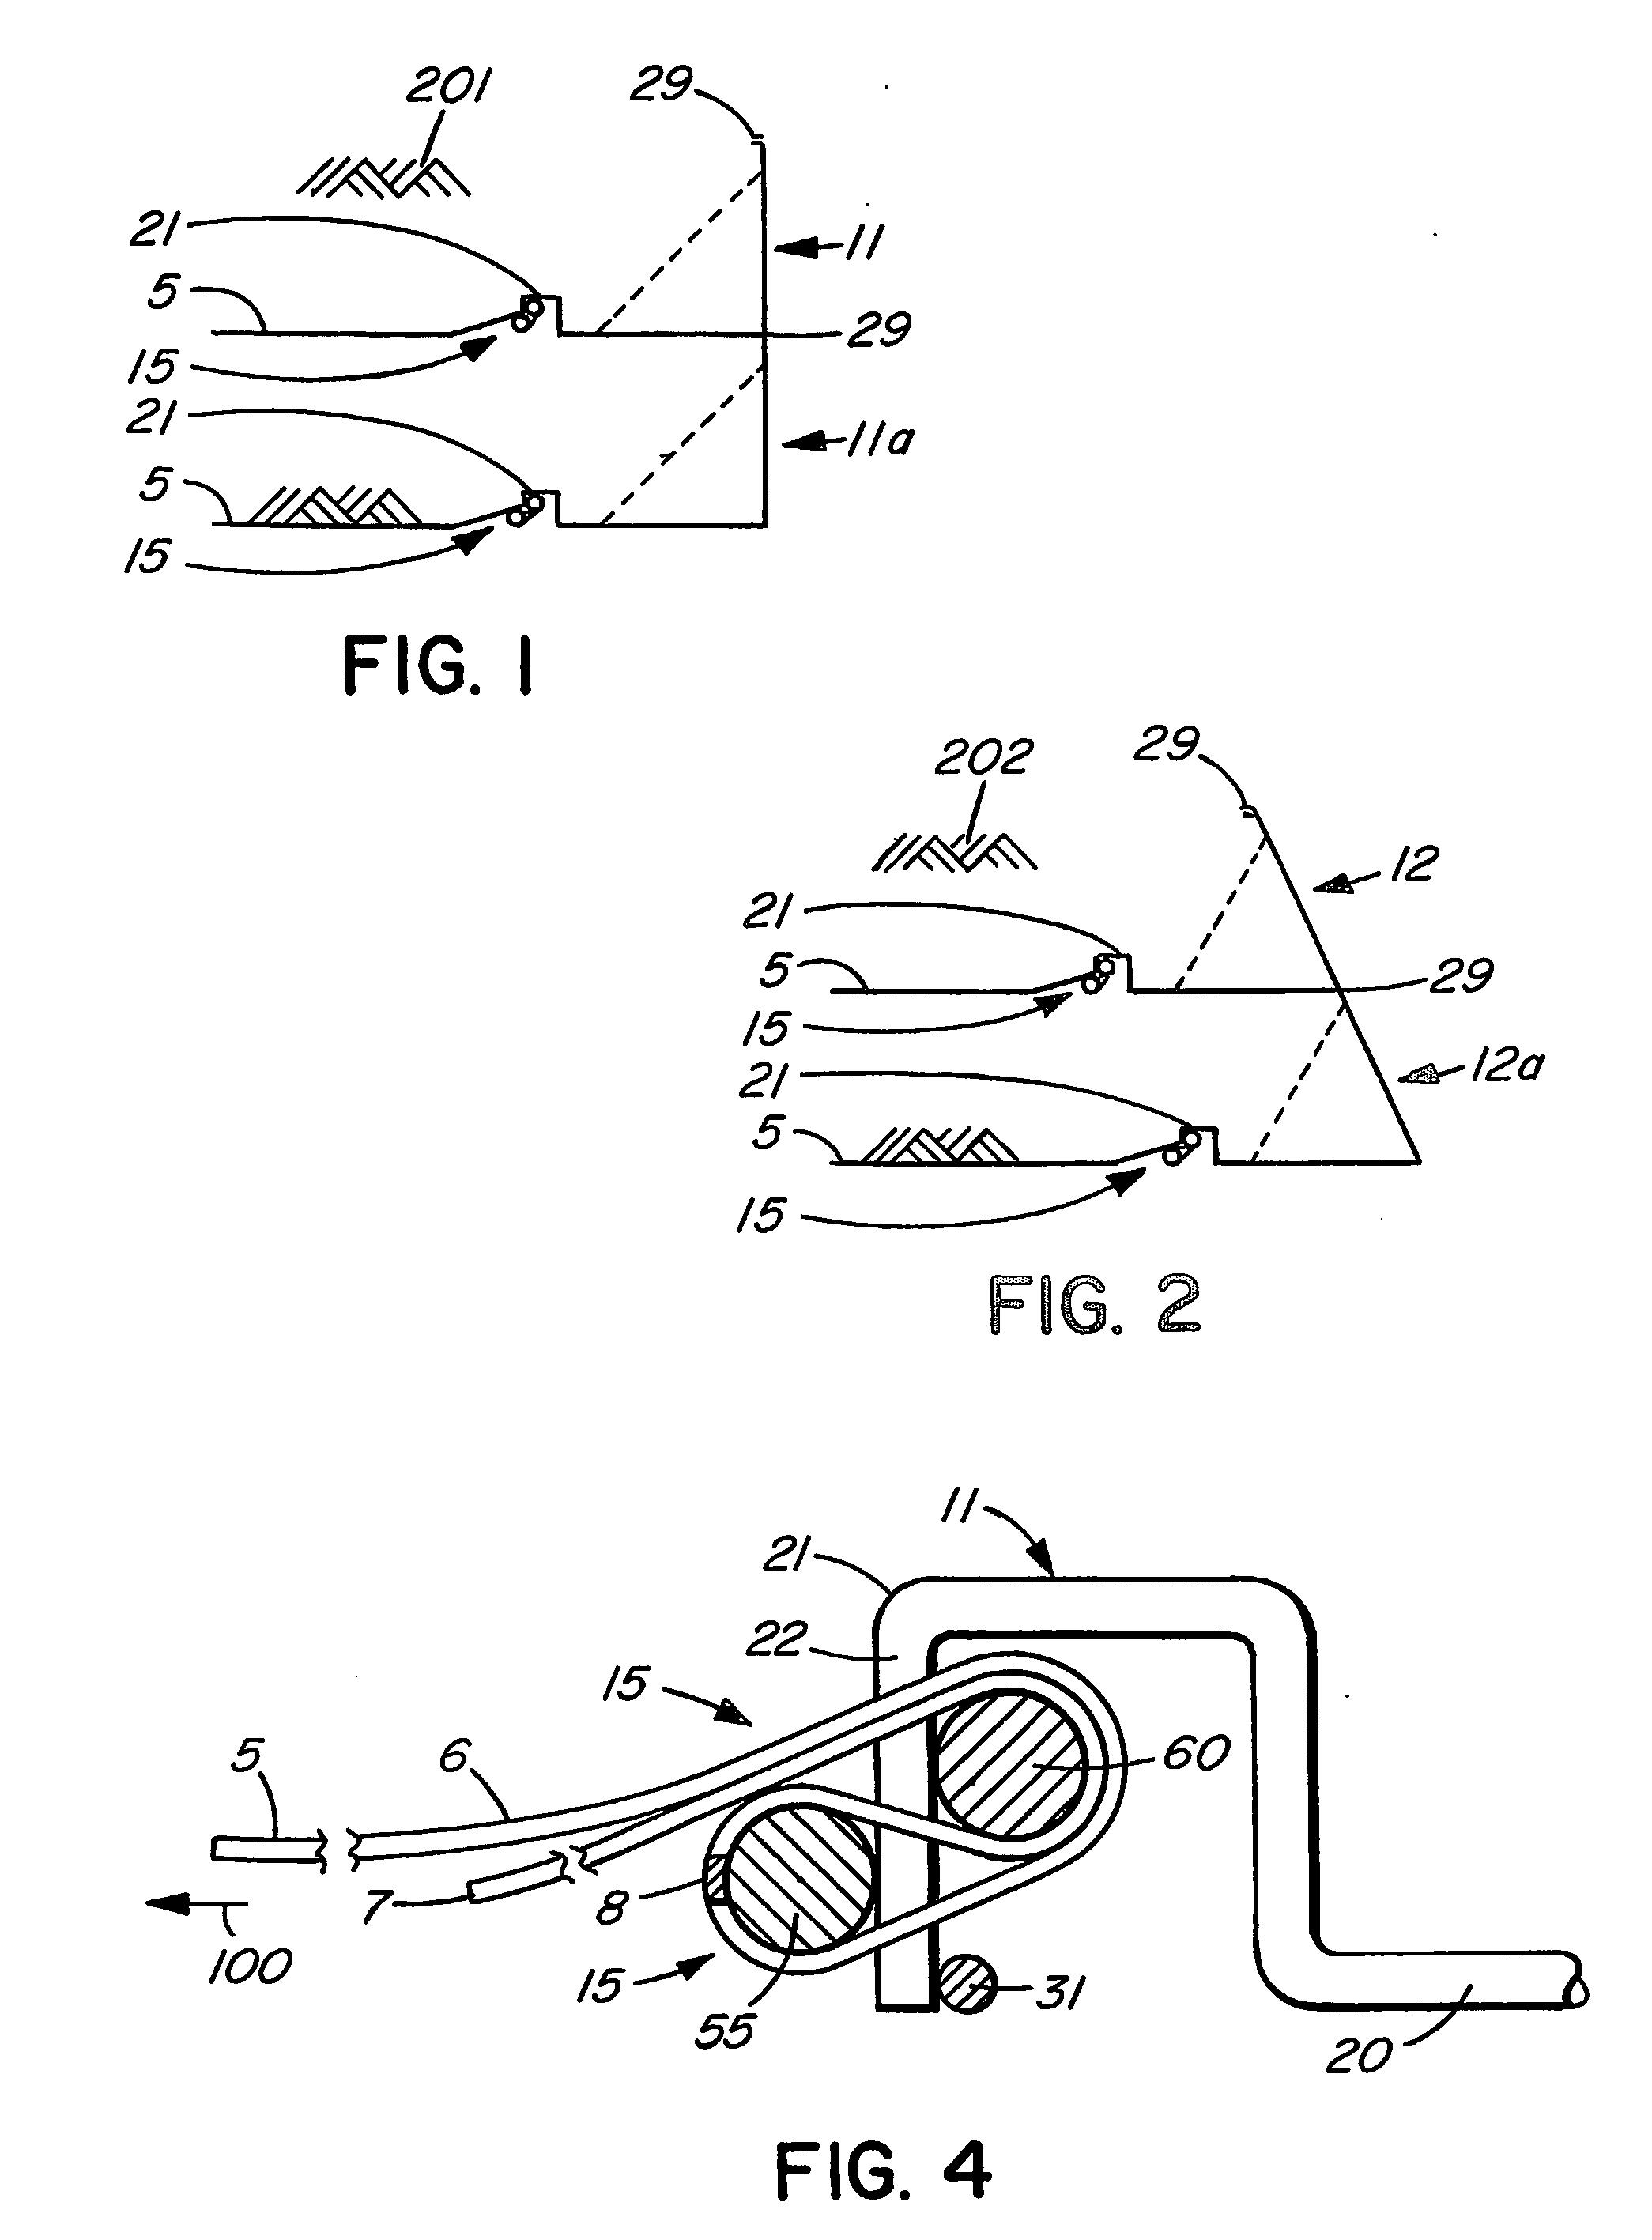 Apparatus and method for stabilizing an earthen embankment